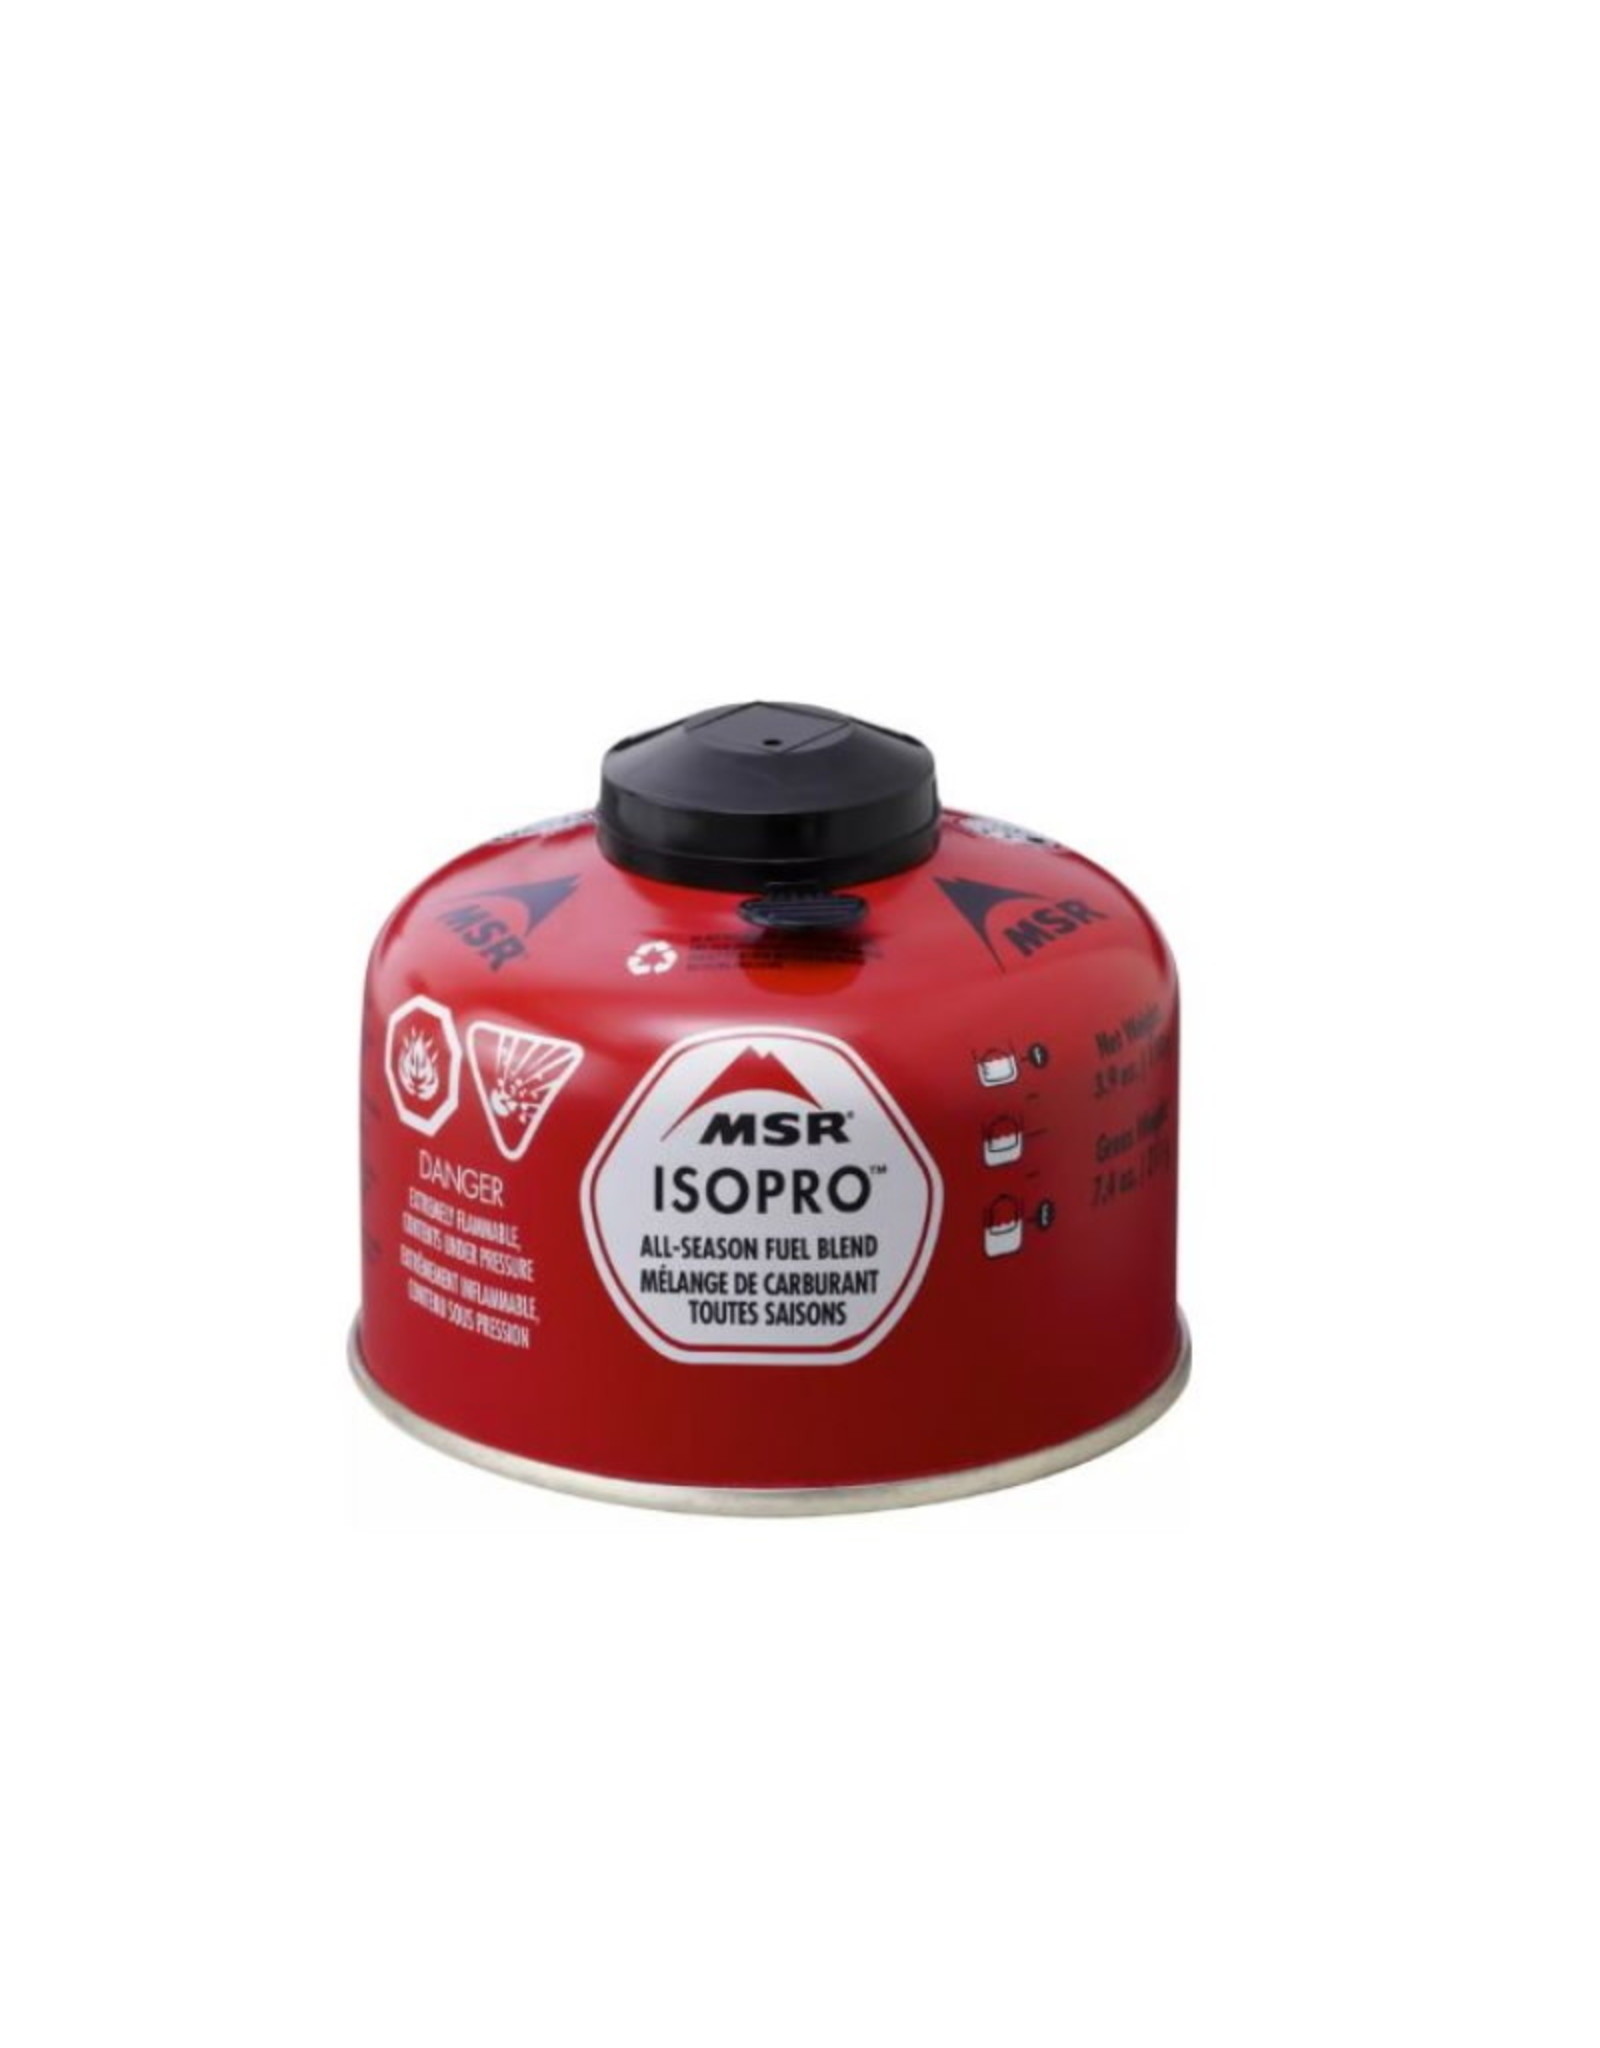 MSR ISOPRO SMALL 4oz CANISTER